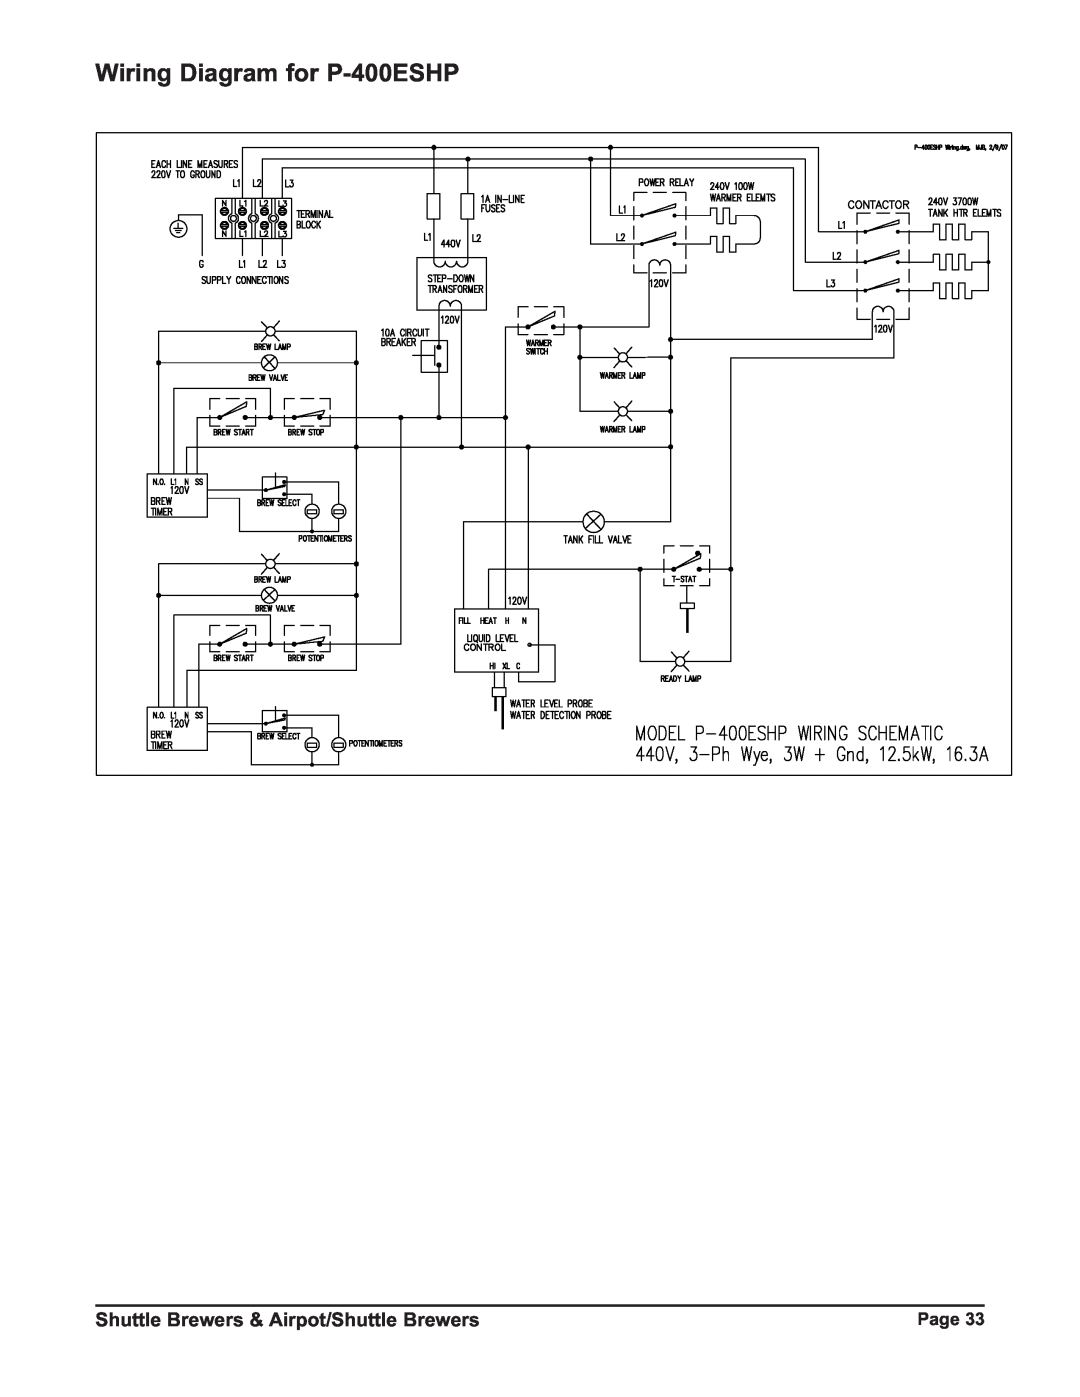 Grindmaster P400ESHP instruction manual Wiring Diagram for P-400ESHP, Shuttle Brewers & Airpot/Shuttle Brewers 